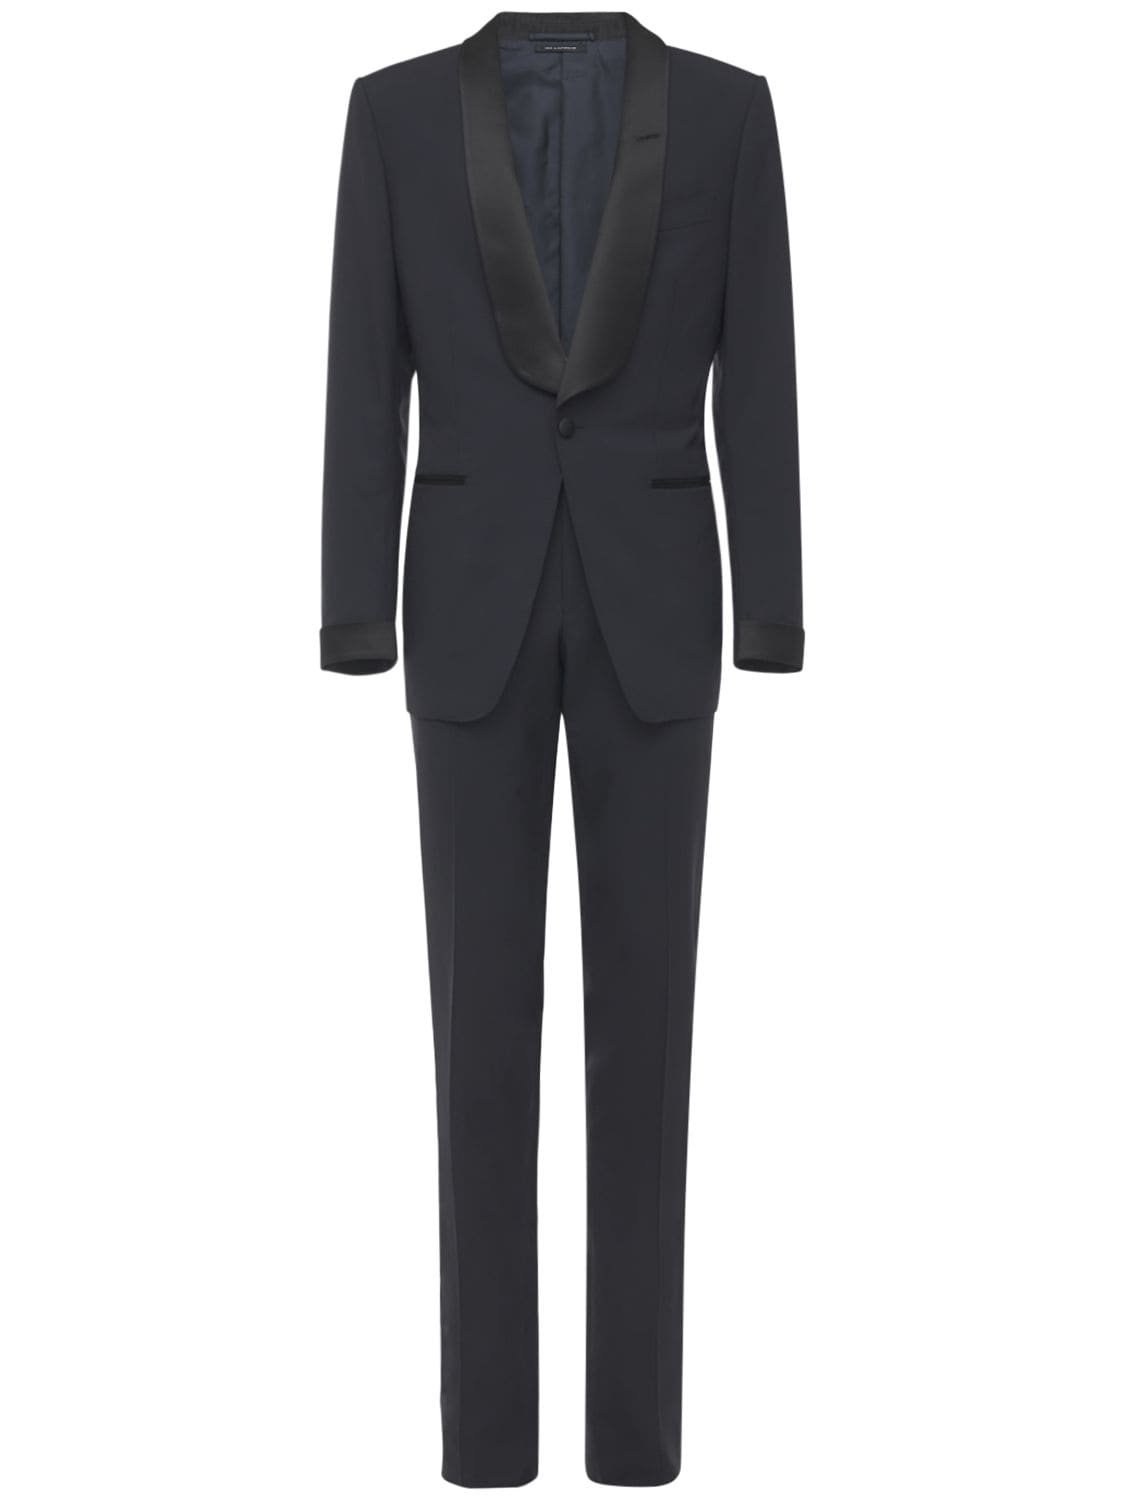 Tom Ford Plain Weave Evening Wool Suit In Navy